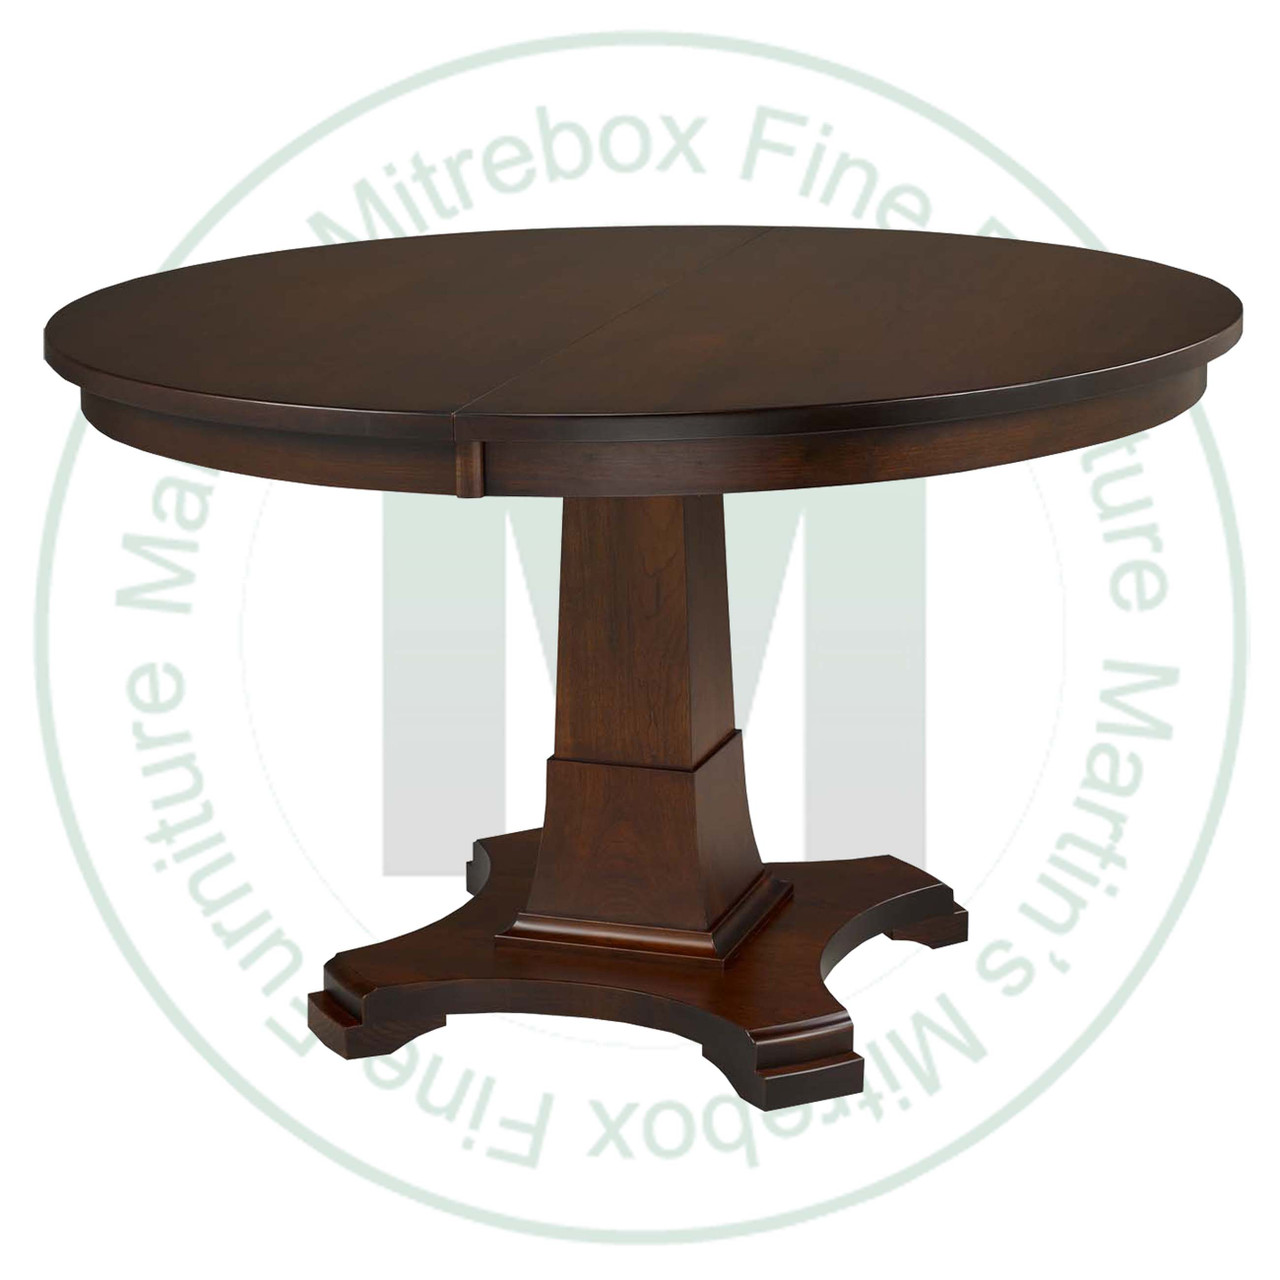 Maple Abbey Single Pedestal Table 36''D x 48''W x 30''H With 1 - 12'' Leaf. Table Has 1.25'' Thick Top